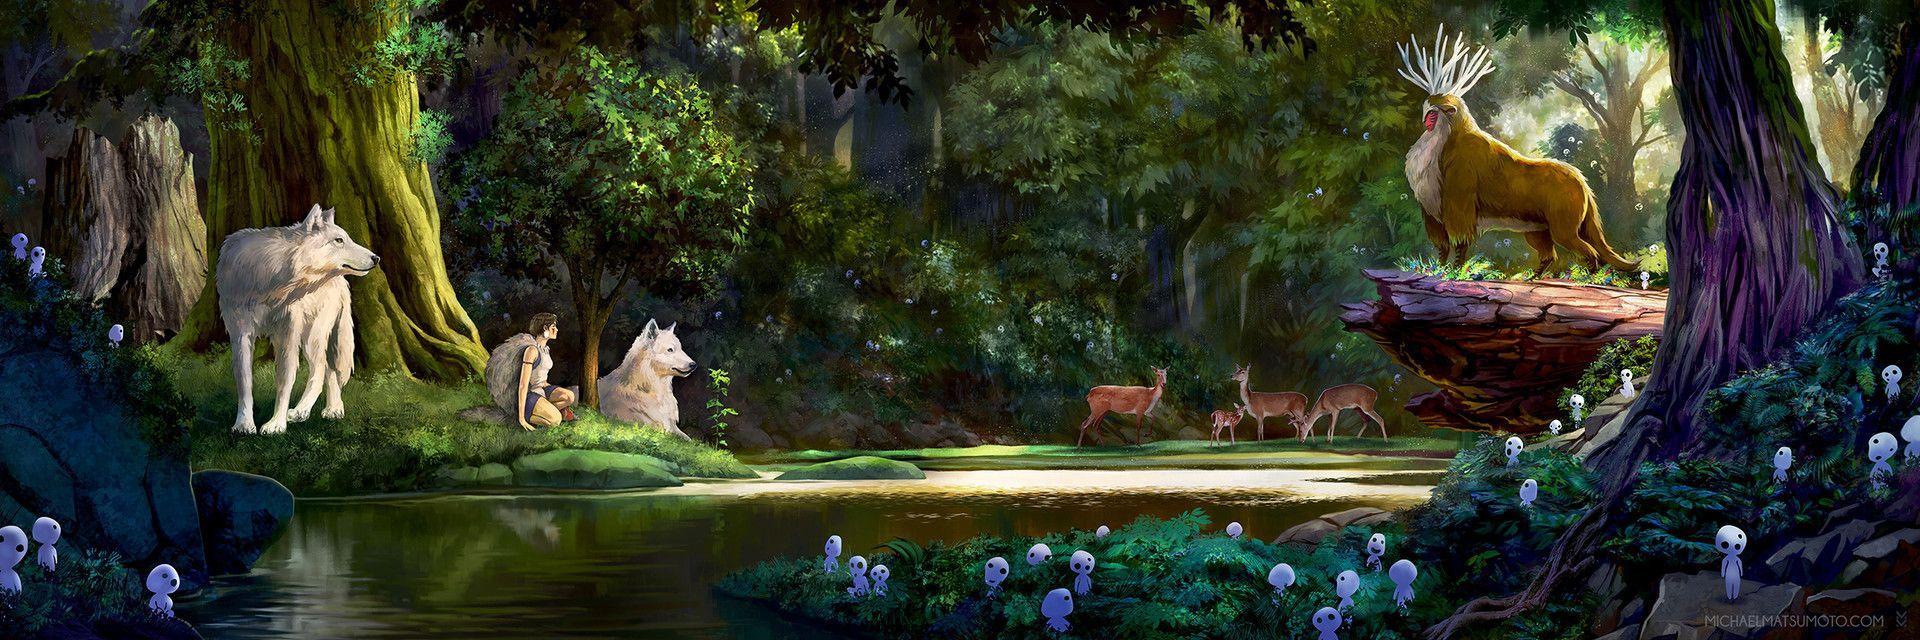 The Princess and the Forest Spirit, Michael Matsumoto